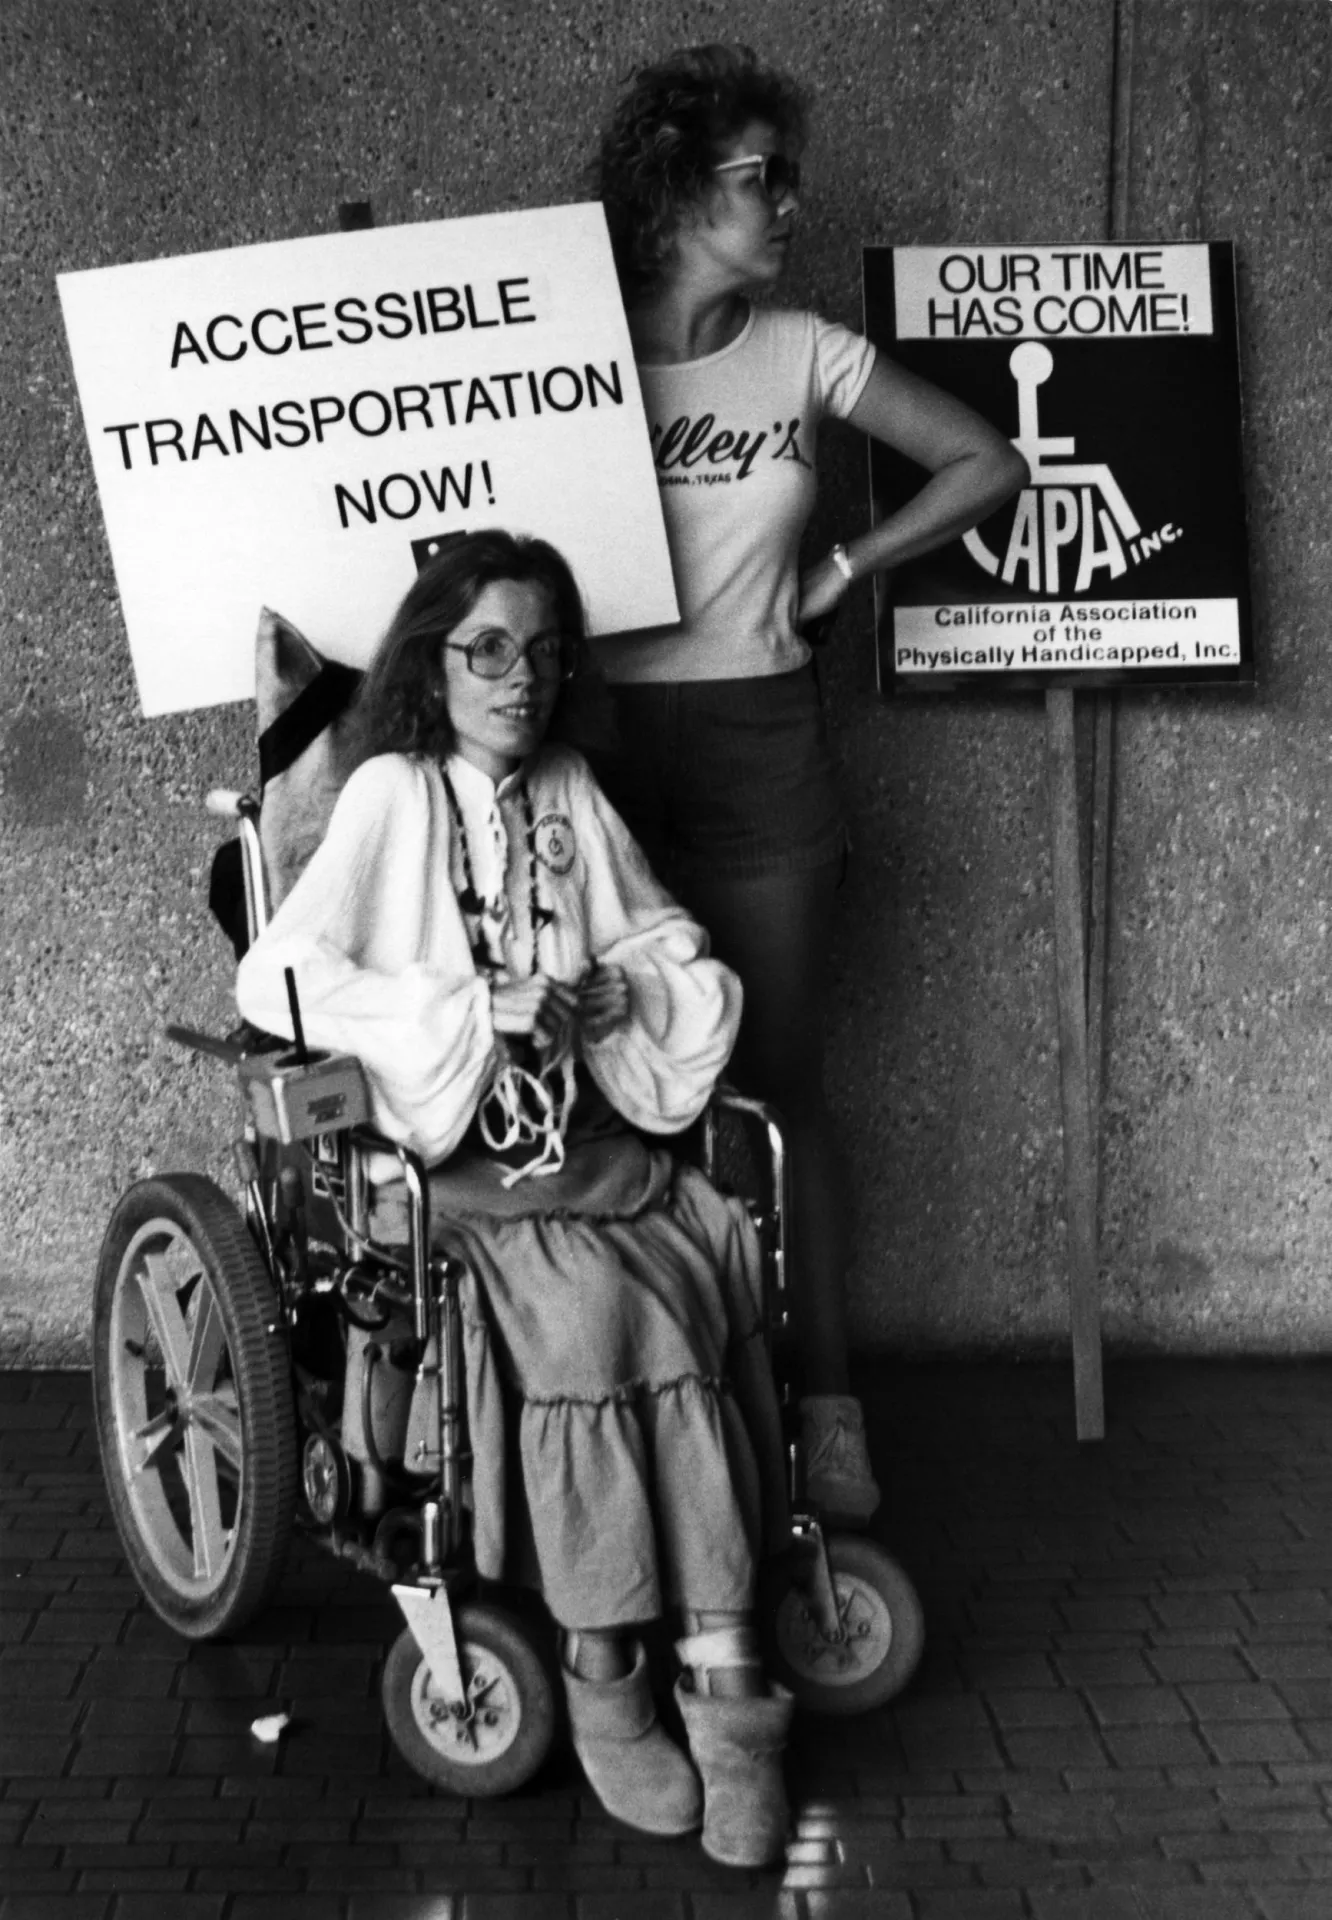 Diane Coleman in Los Angeles sitting in her motorized wheelchair with protest sign which reads “Accessible Transportation Now”.